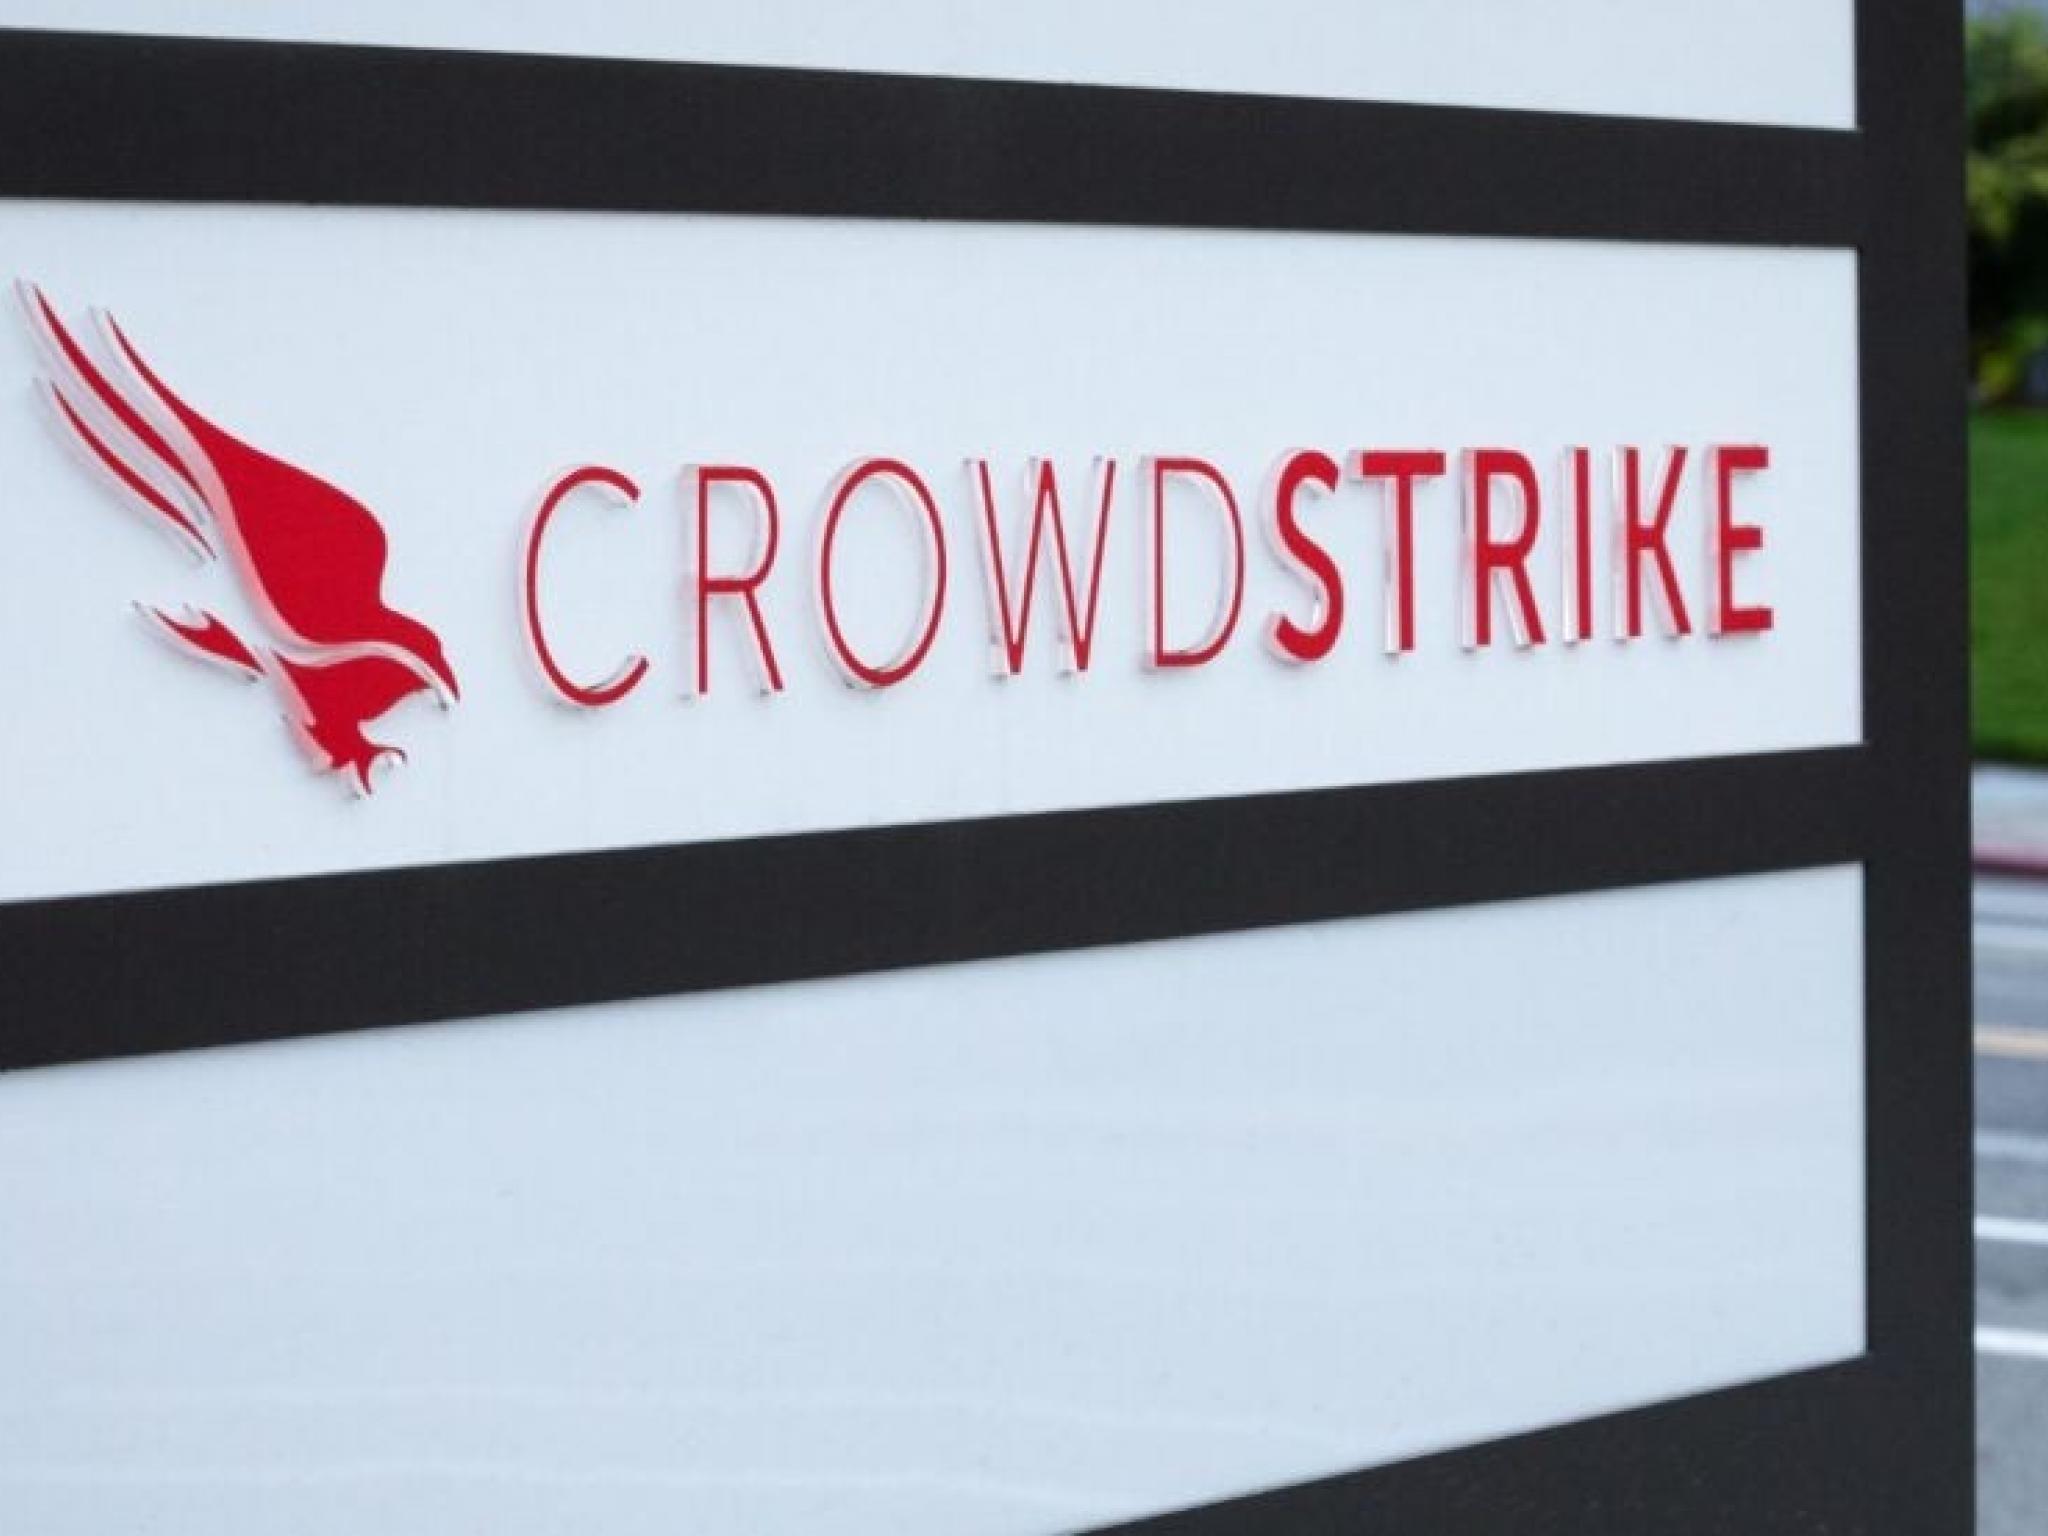  crowdstrike-returns-could-lag-others-despite-multitude-of-opportunities-analyst-says- 